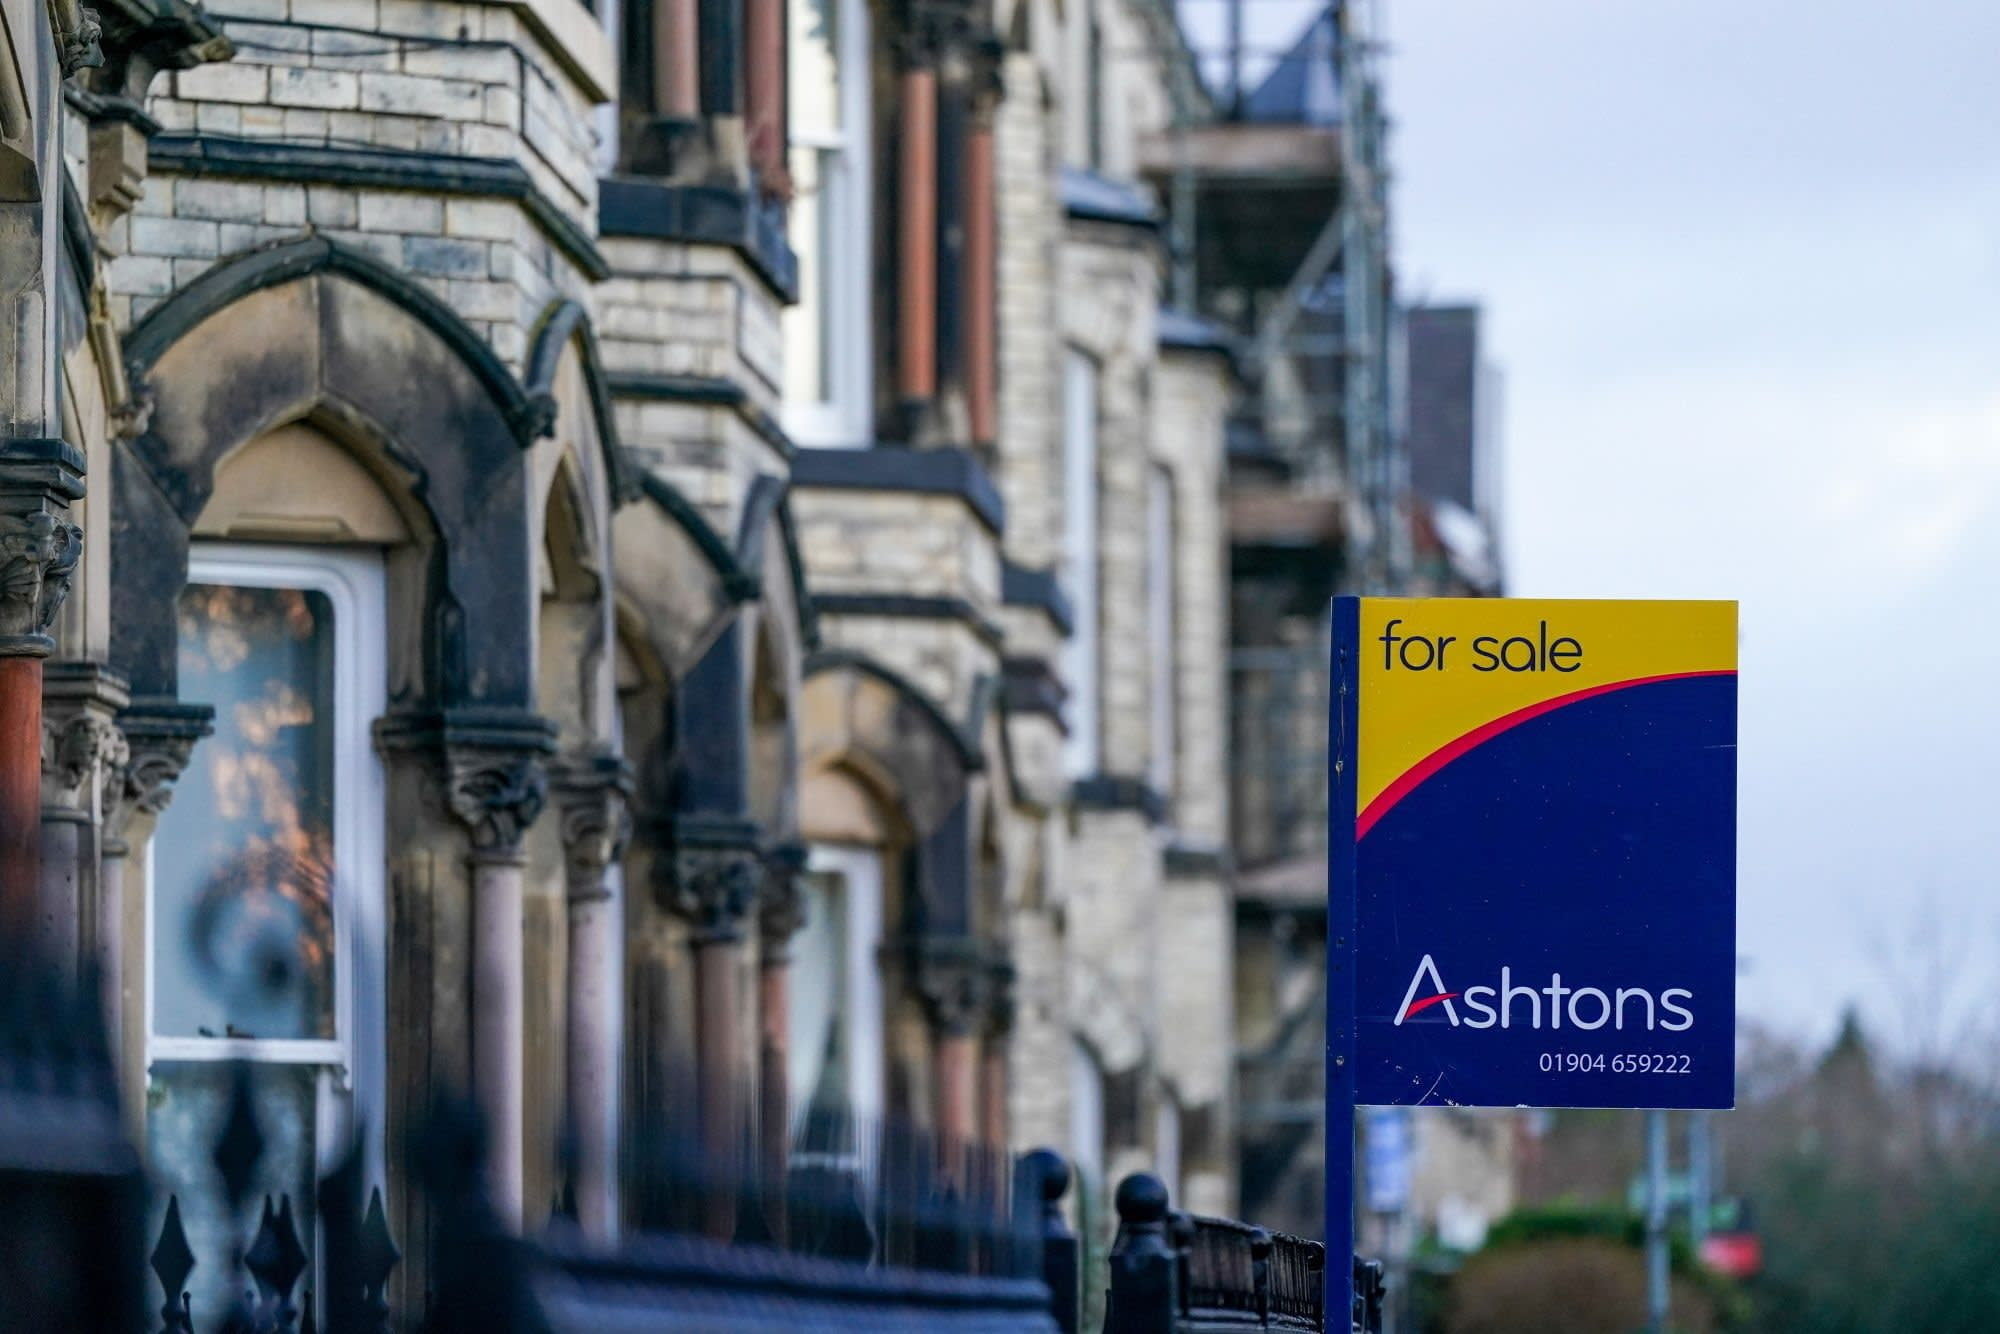 Sub-4% fixed mortgage rates could be here ‘by March’